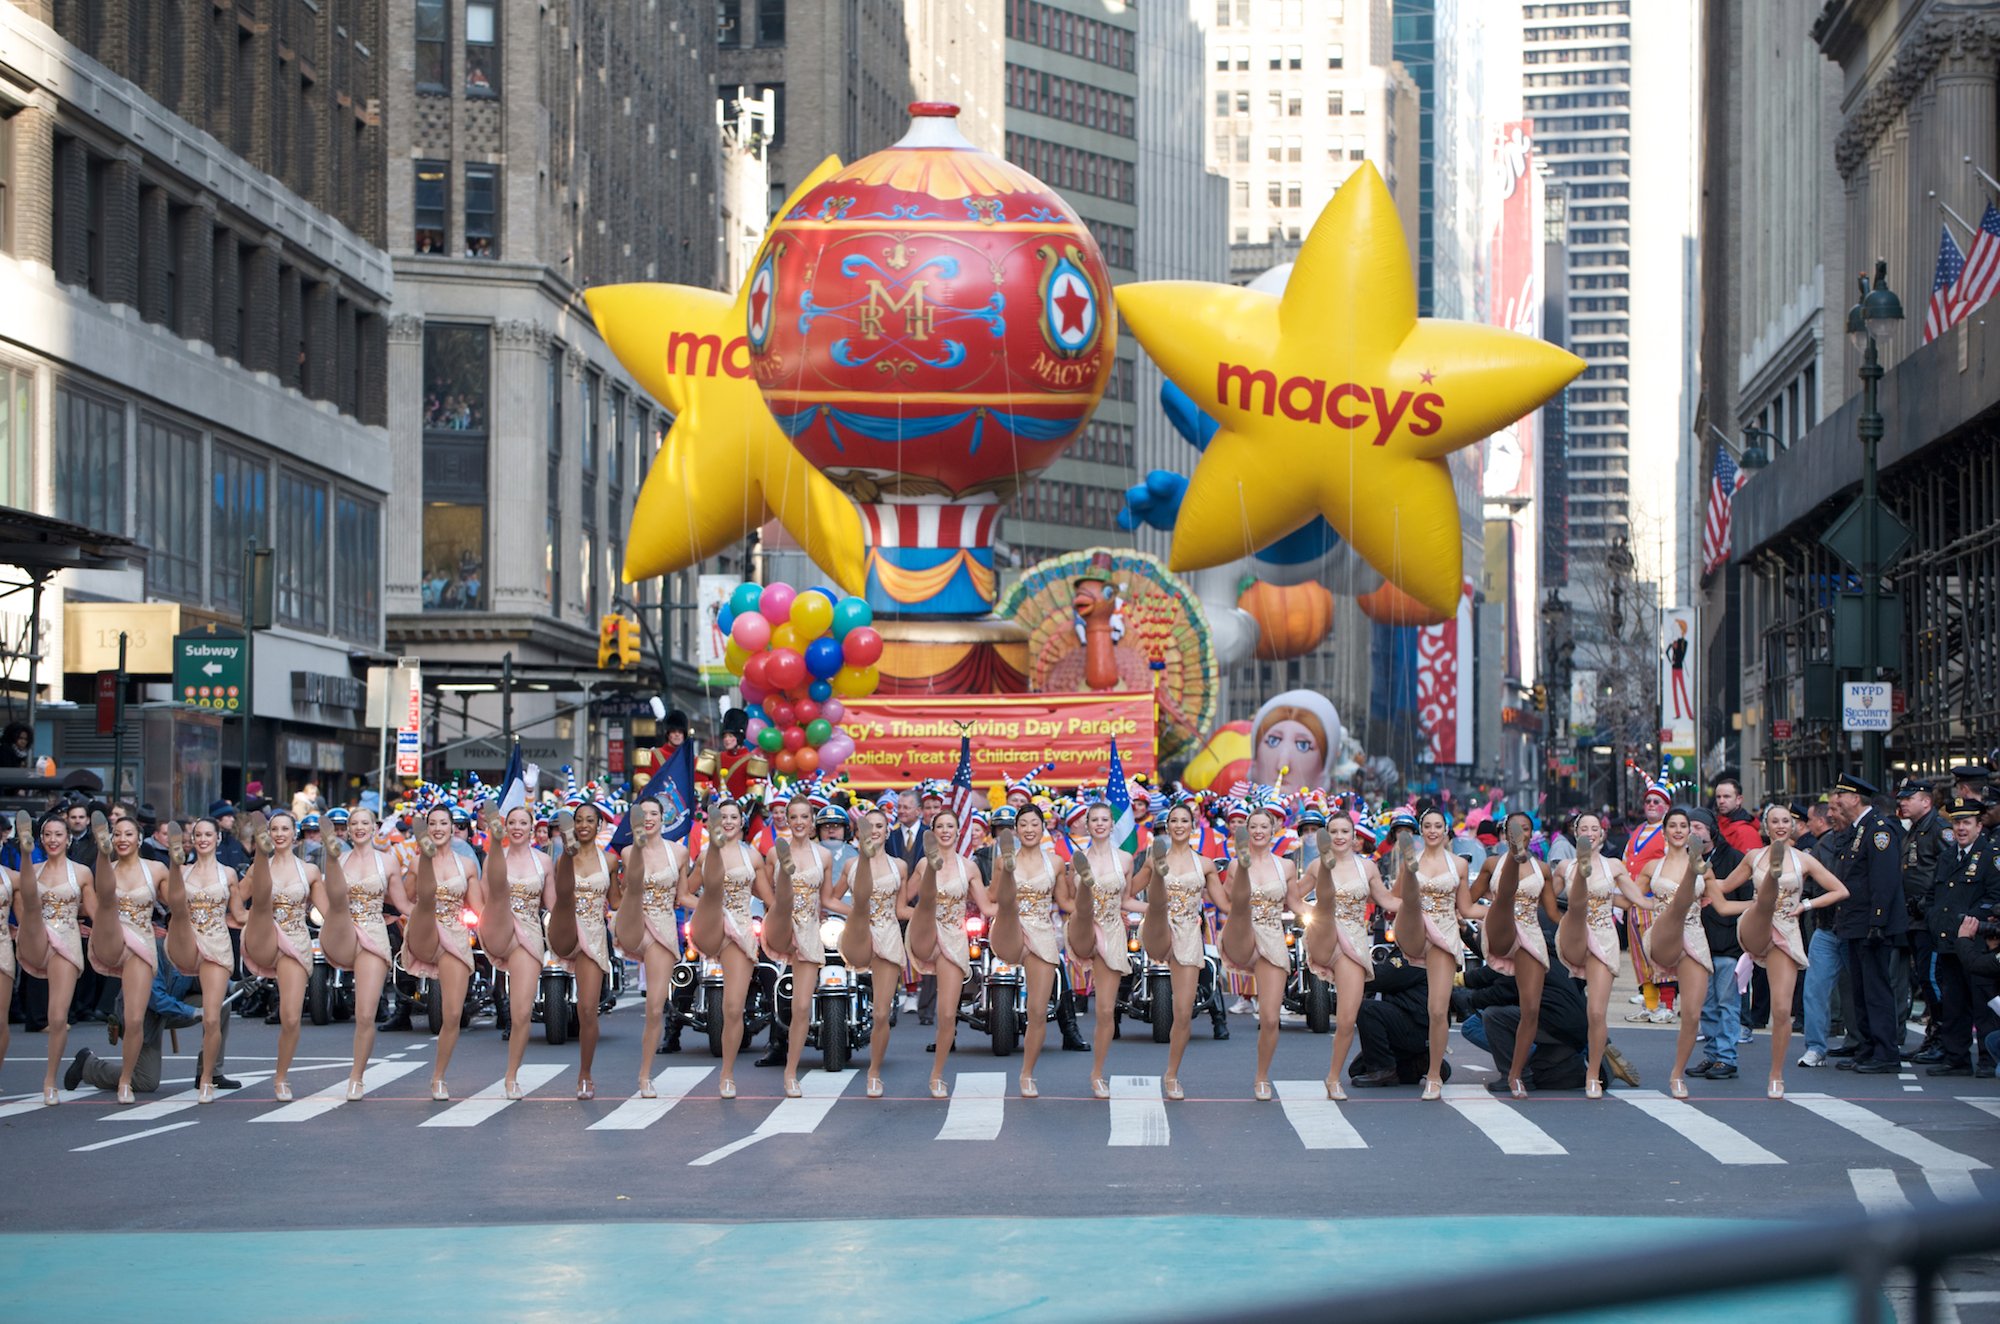 The Source |Patti Labelle, Ella Mai, Keke Palmer to Appear at Macy's Thanksgiving Parade